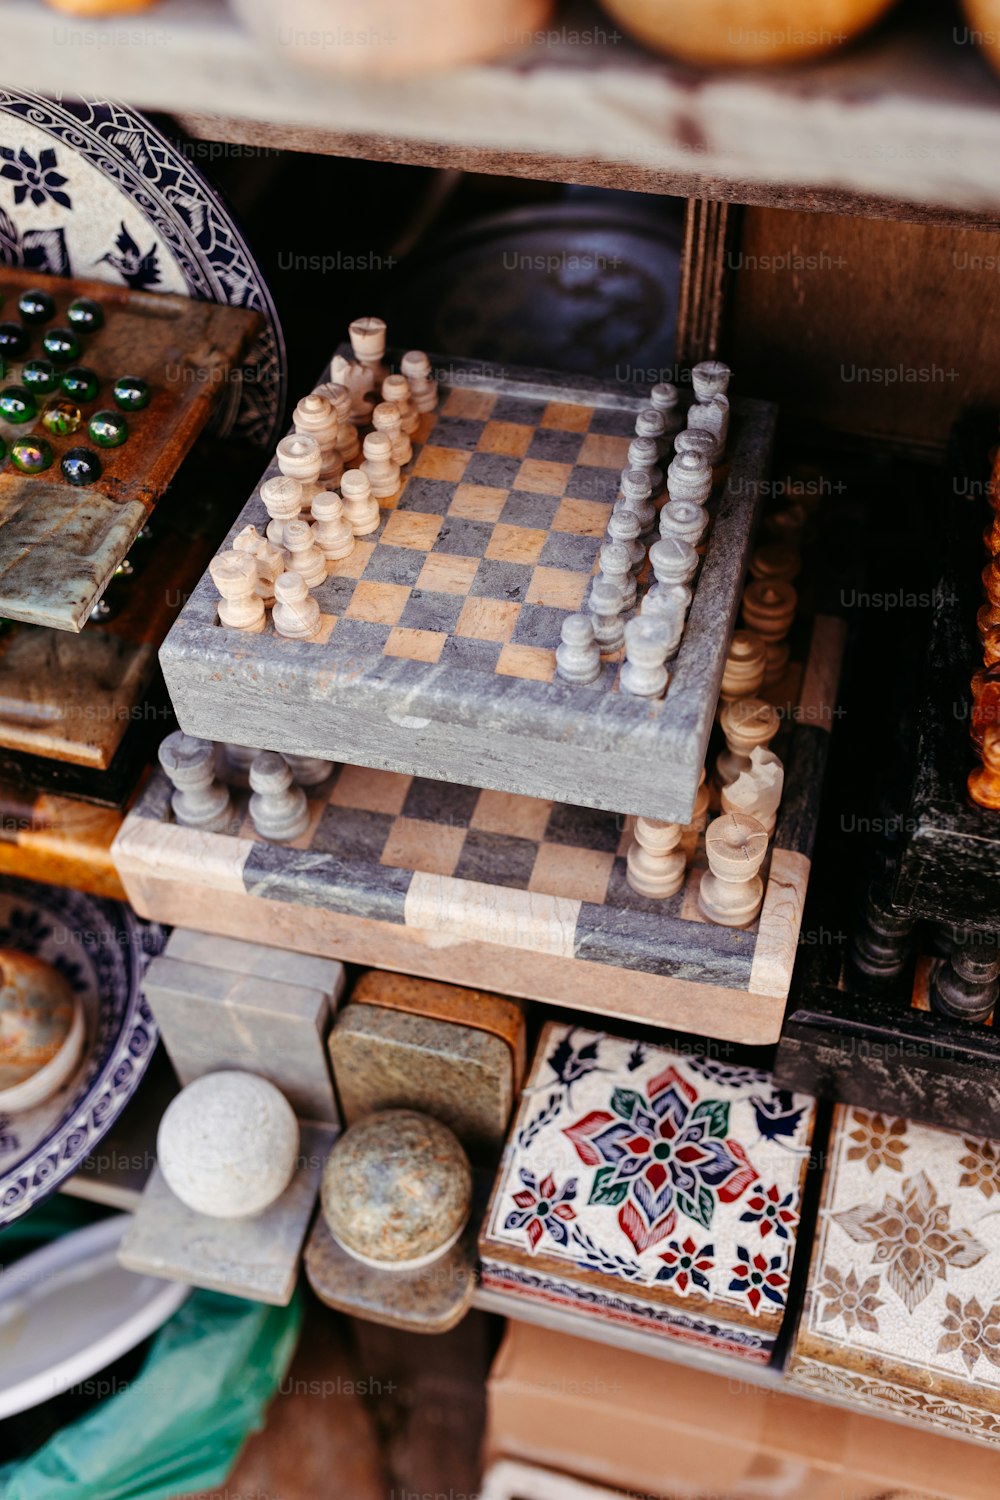 a close up of a chess board on a table